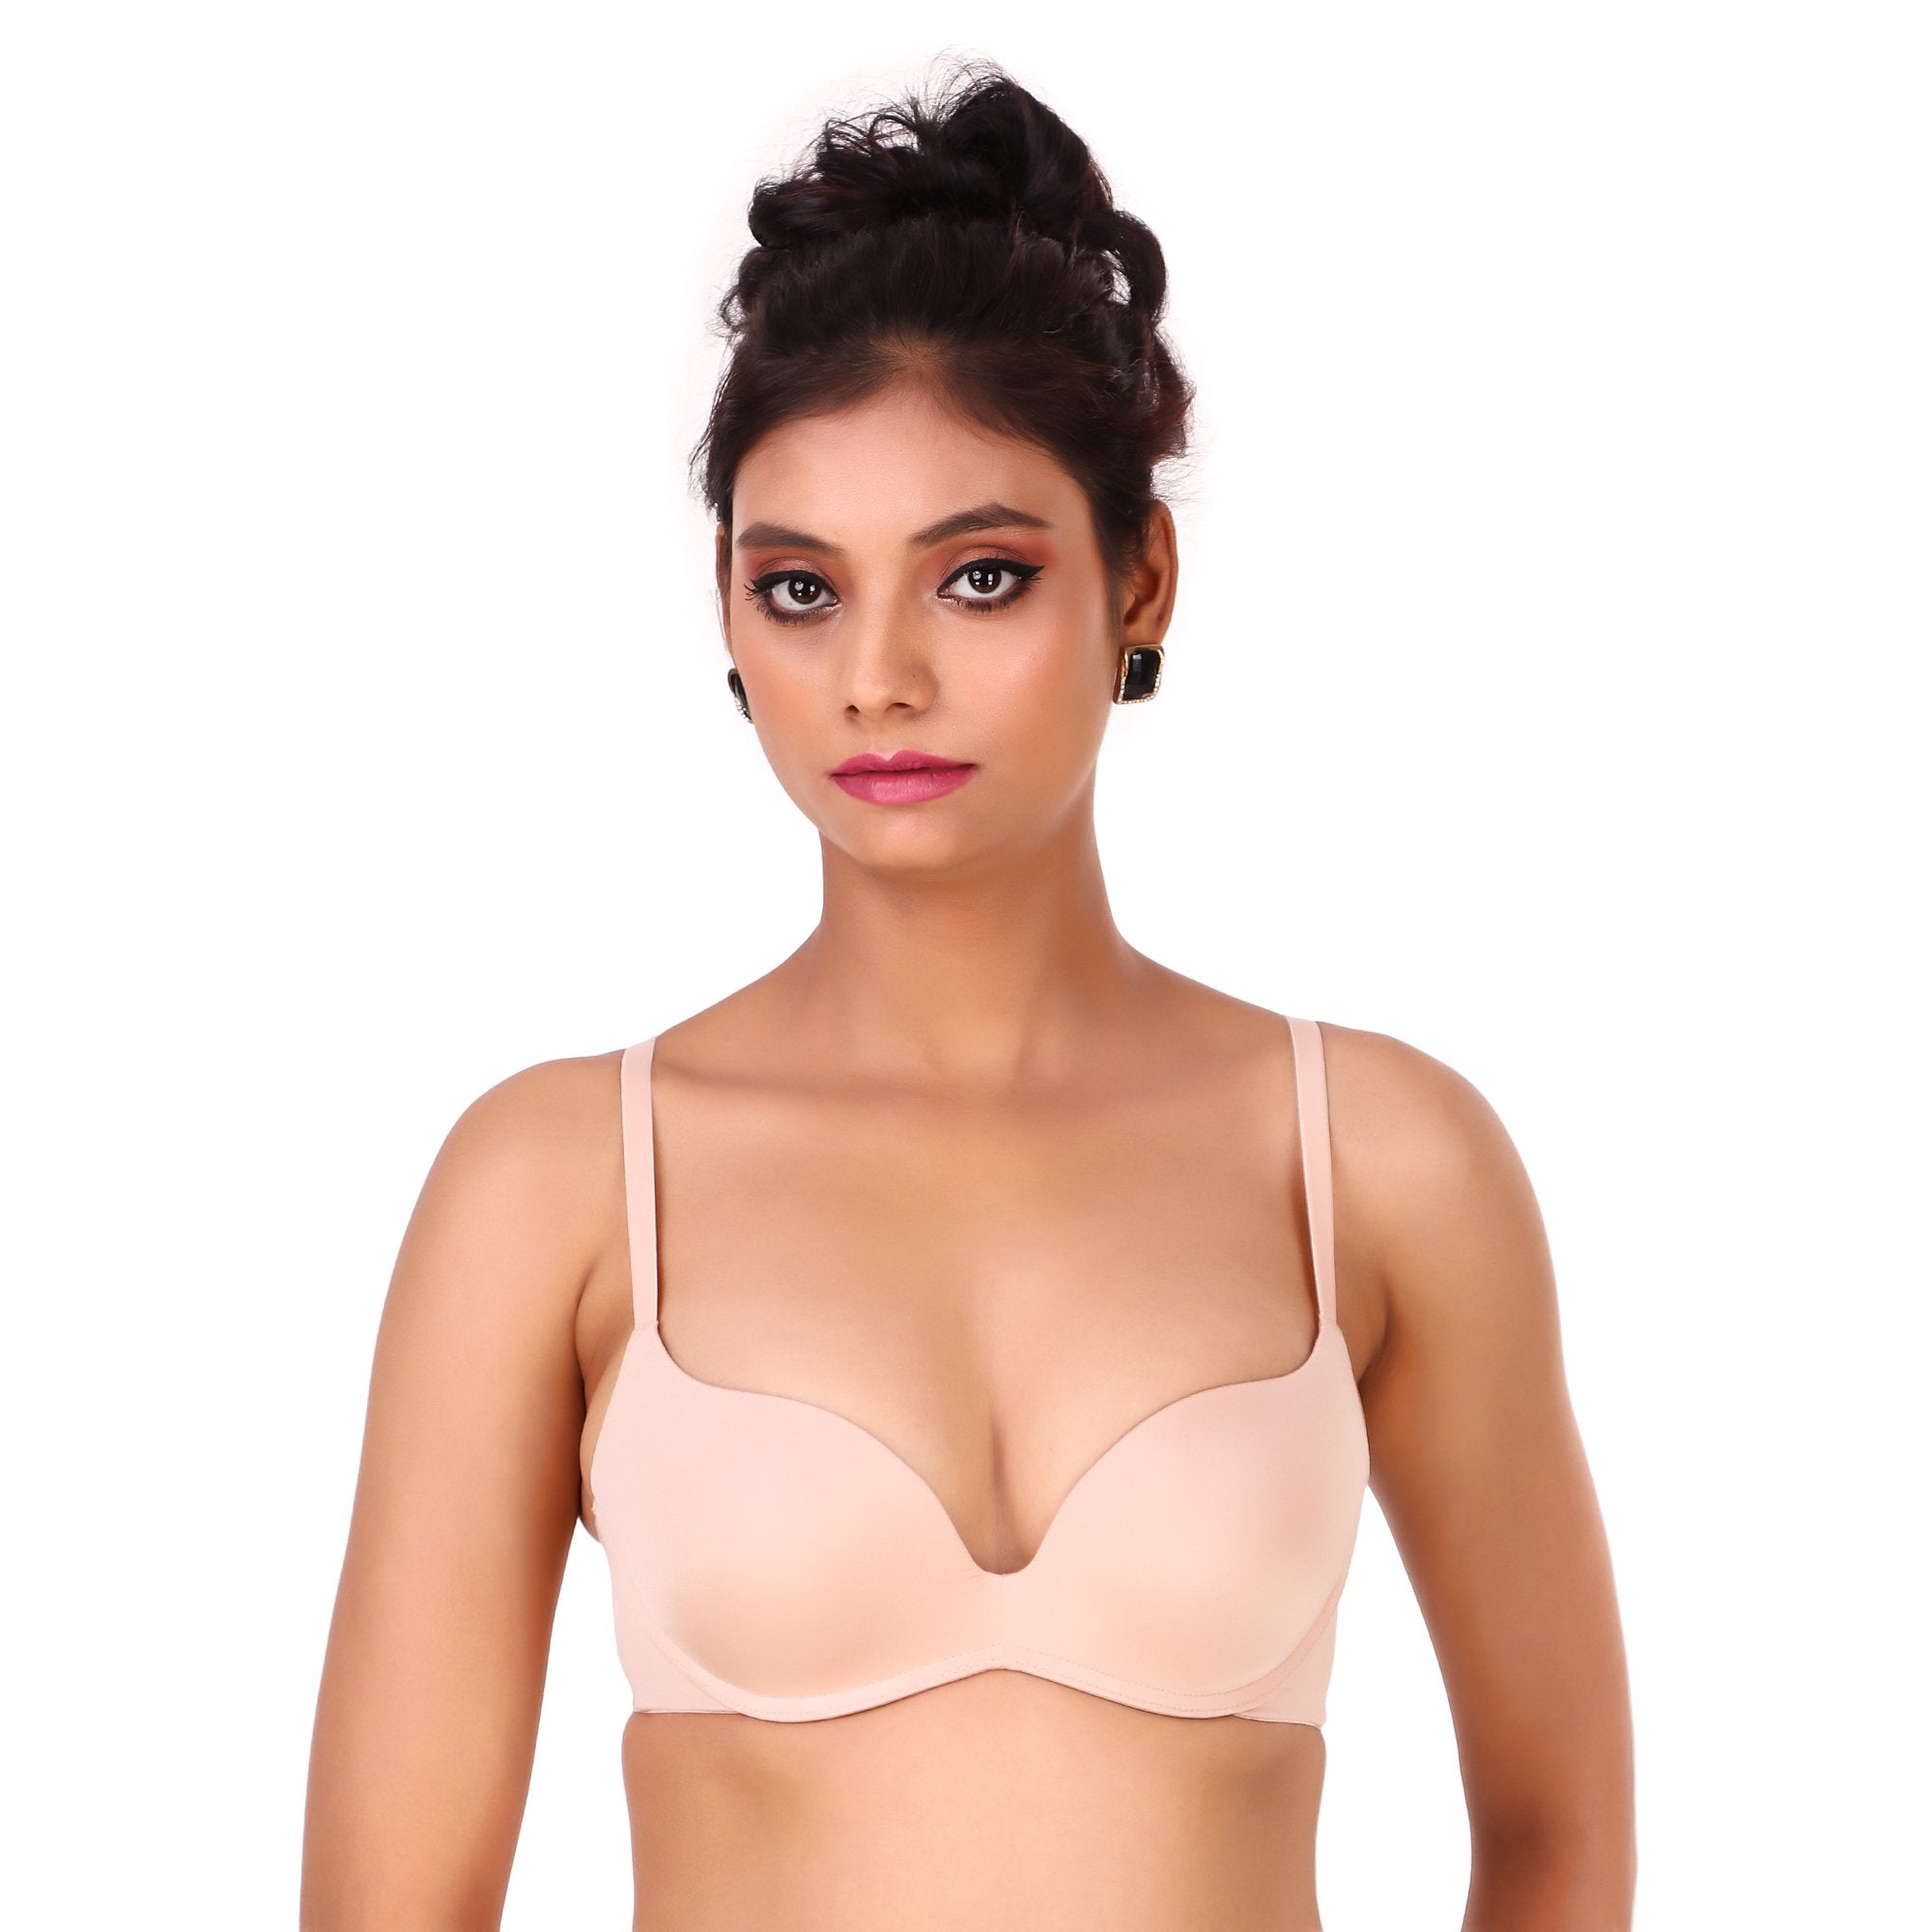 Maximizer Wired Push Up Bra in Smooth Skin